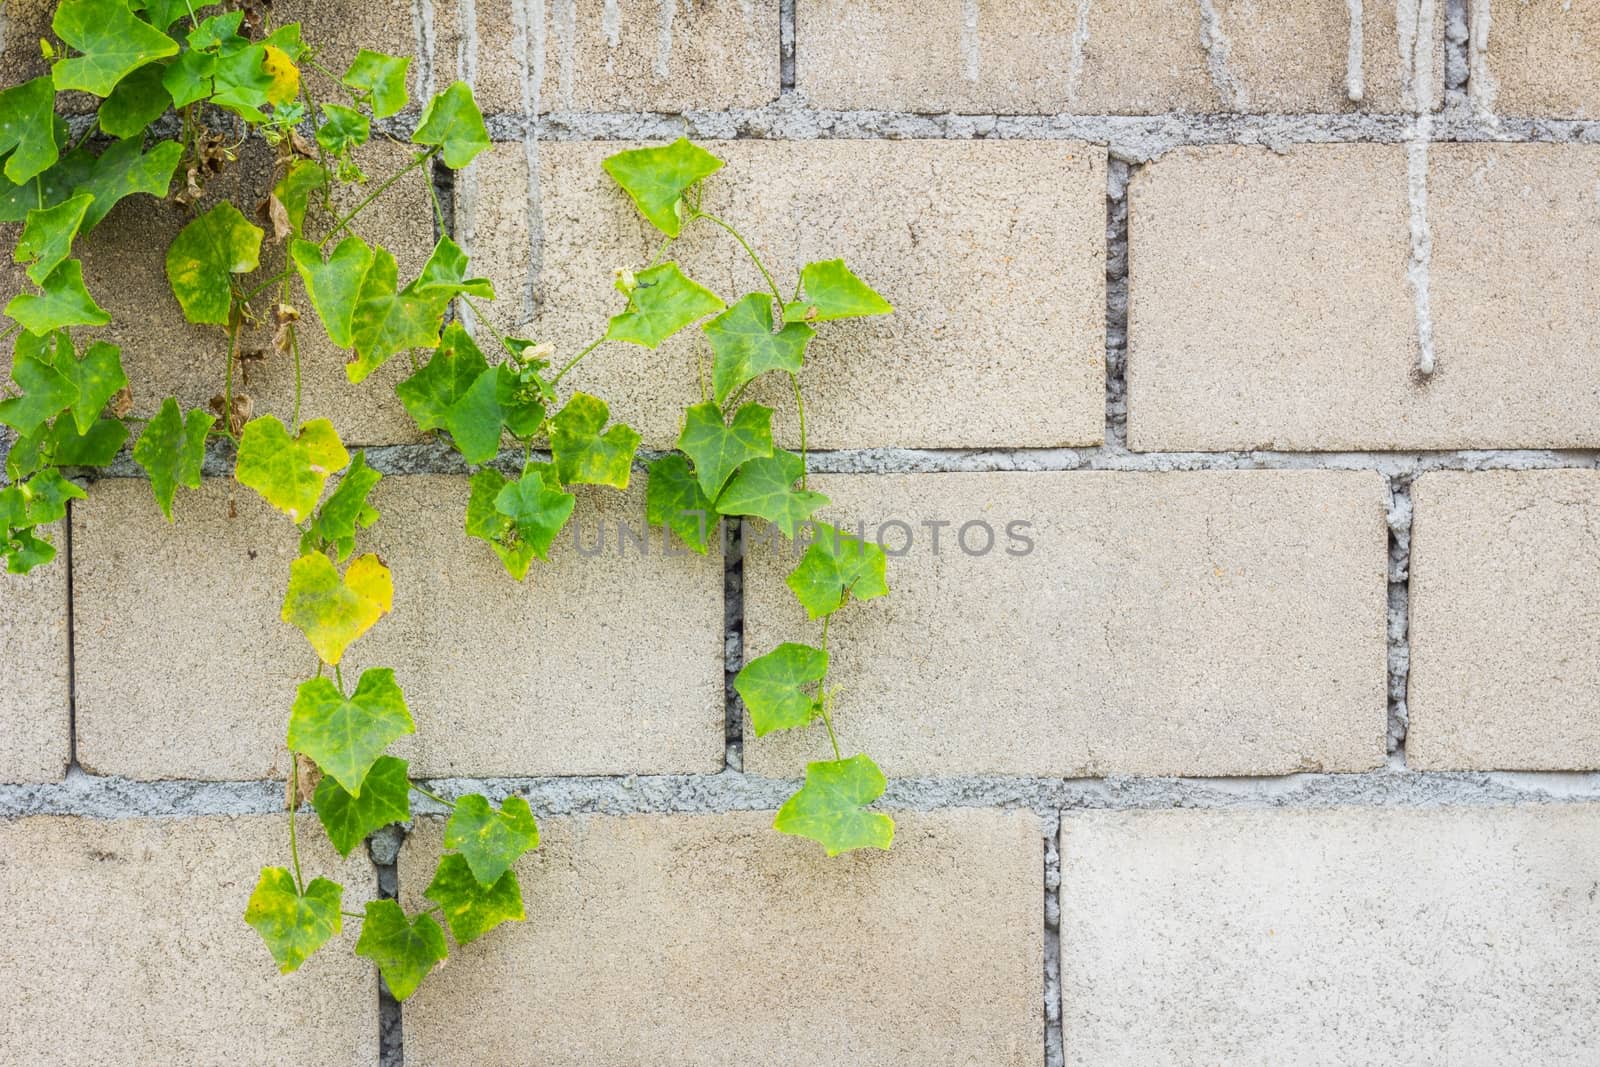 Hollow brick wall with green lvy Gourd